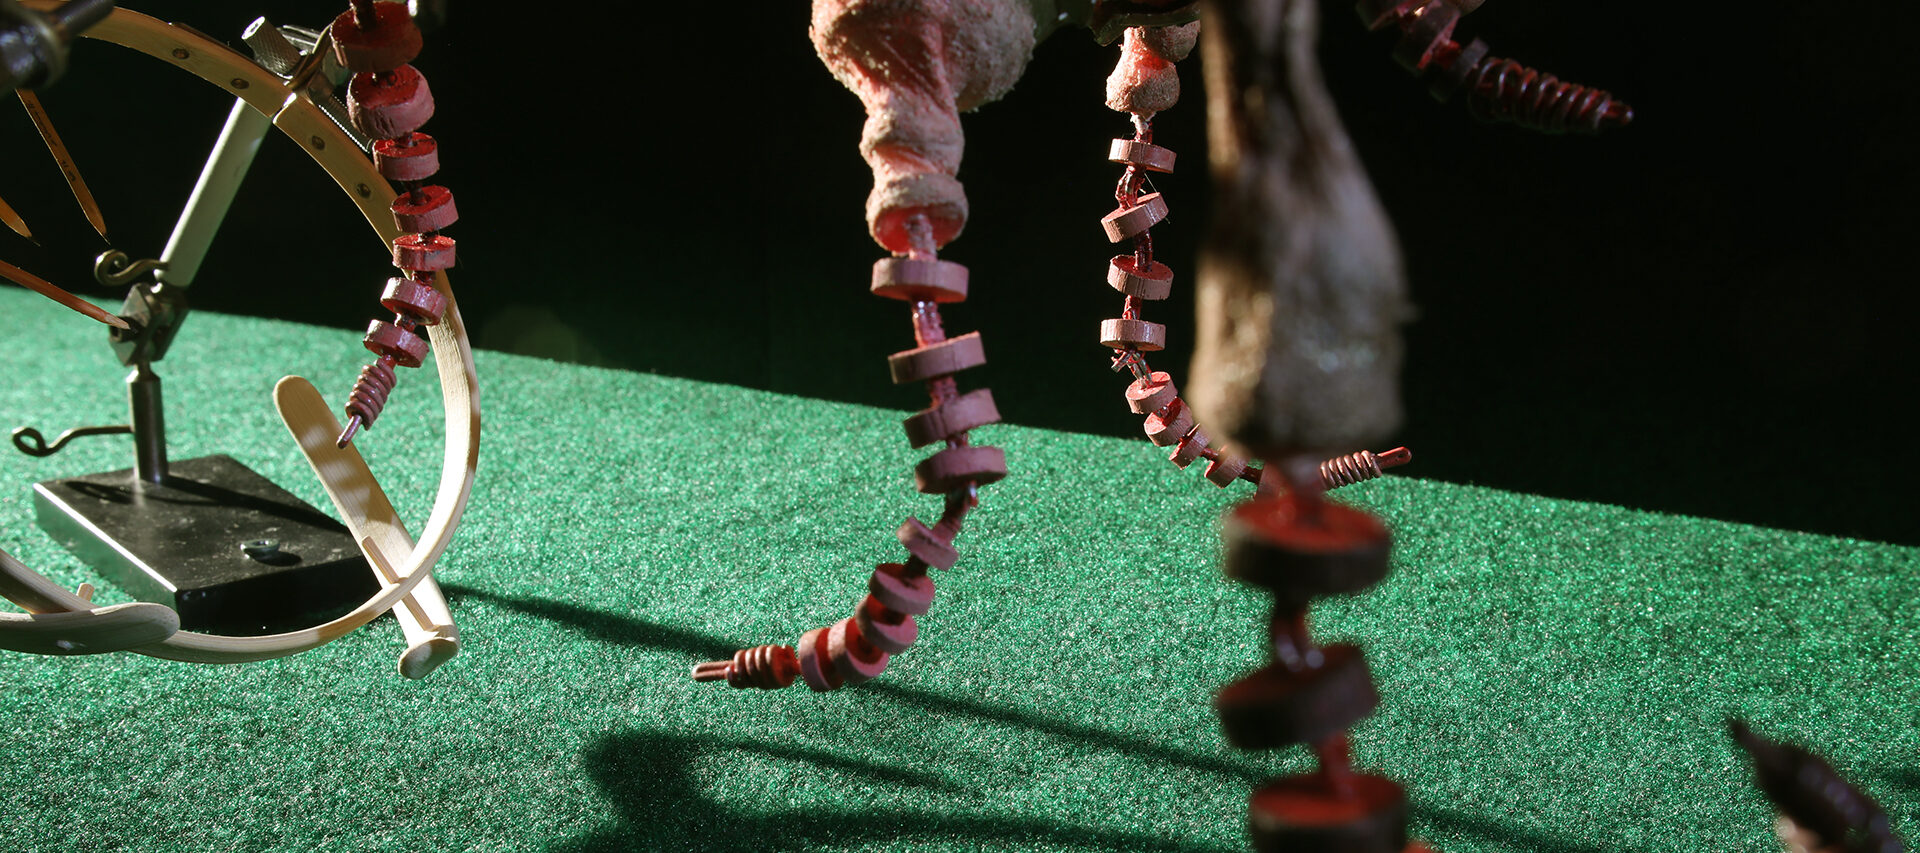 In this screen still from a puppet stop motion animation, miniature sculptures made from wood, metal, and other materials are arranged on top of, and hang above, green turf, set against a pitch black background. The sculpture's shadows appear on the turf. The sculptures are made up of various circular designs.